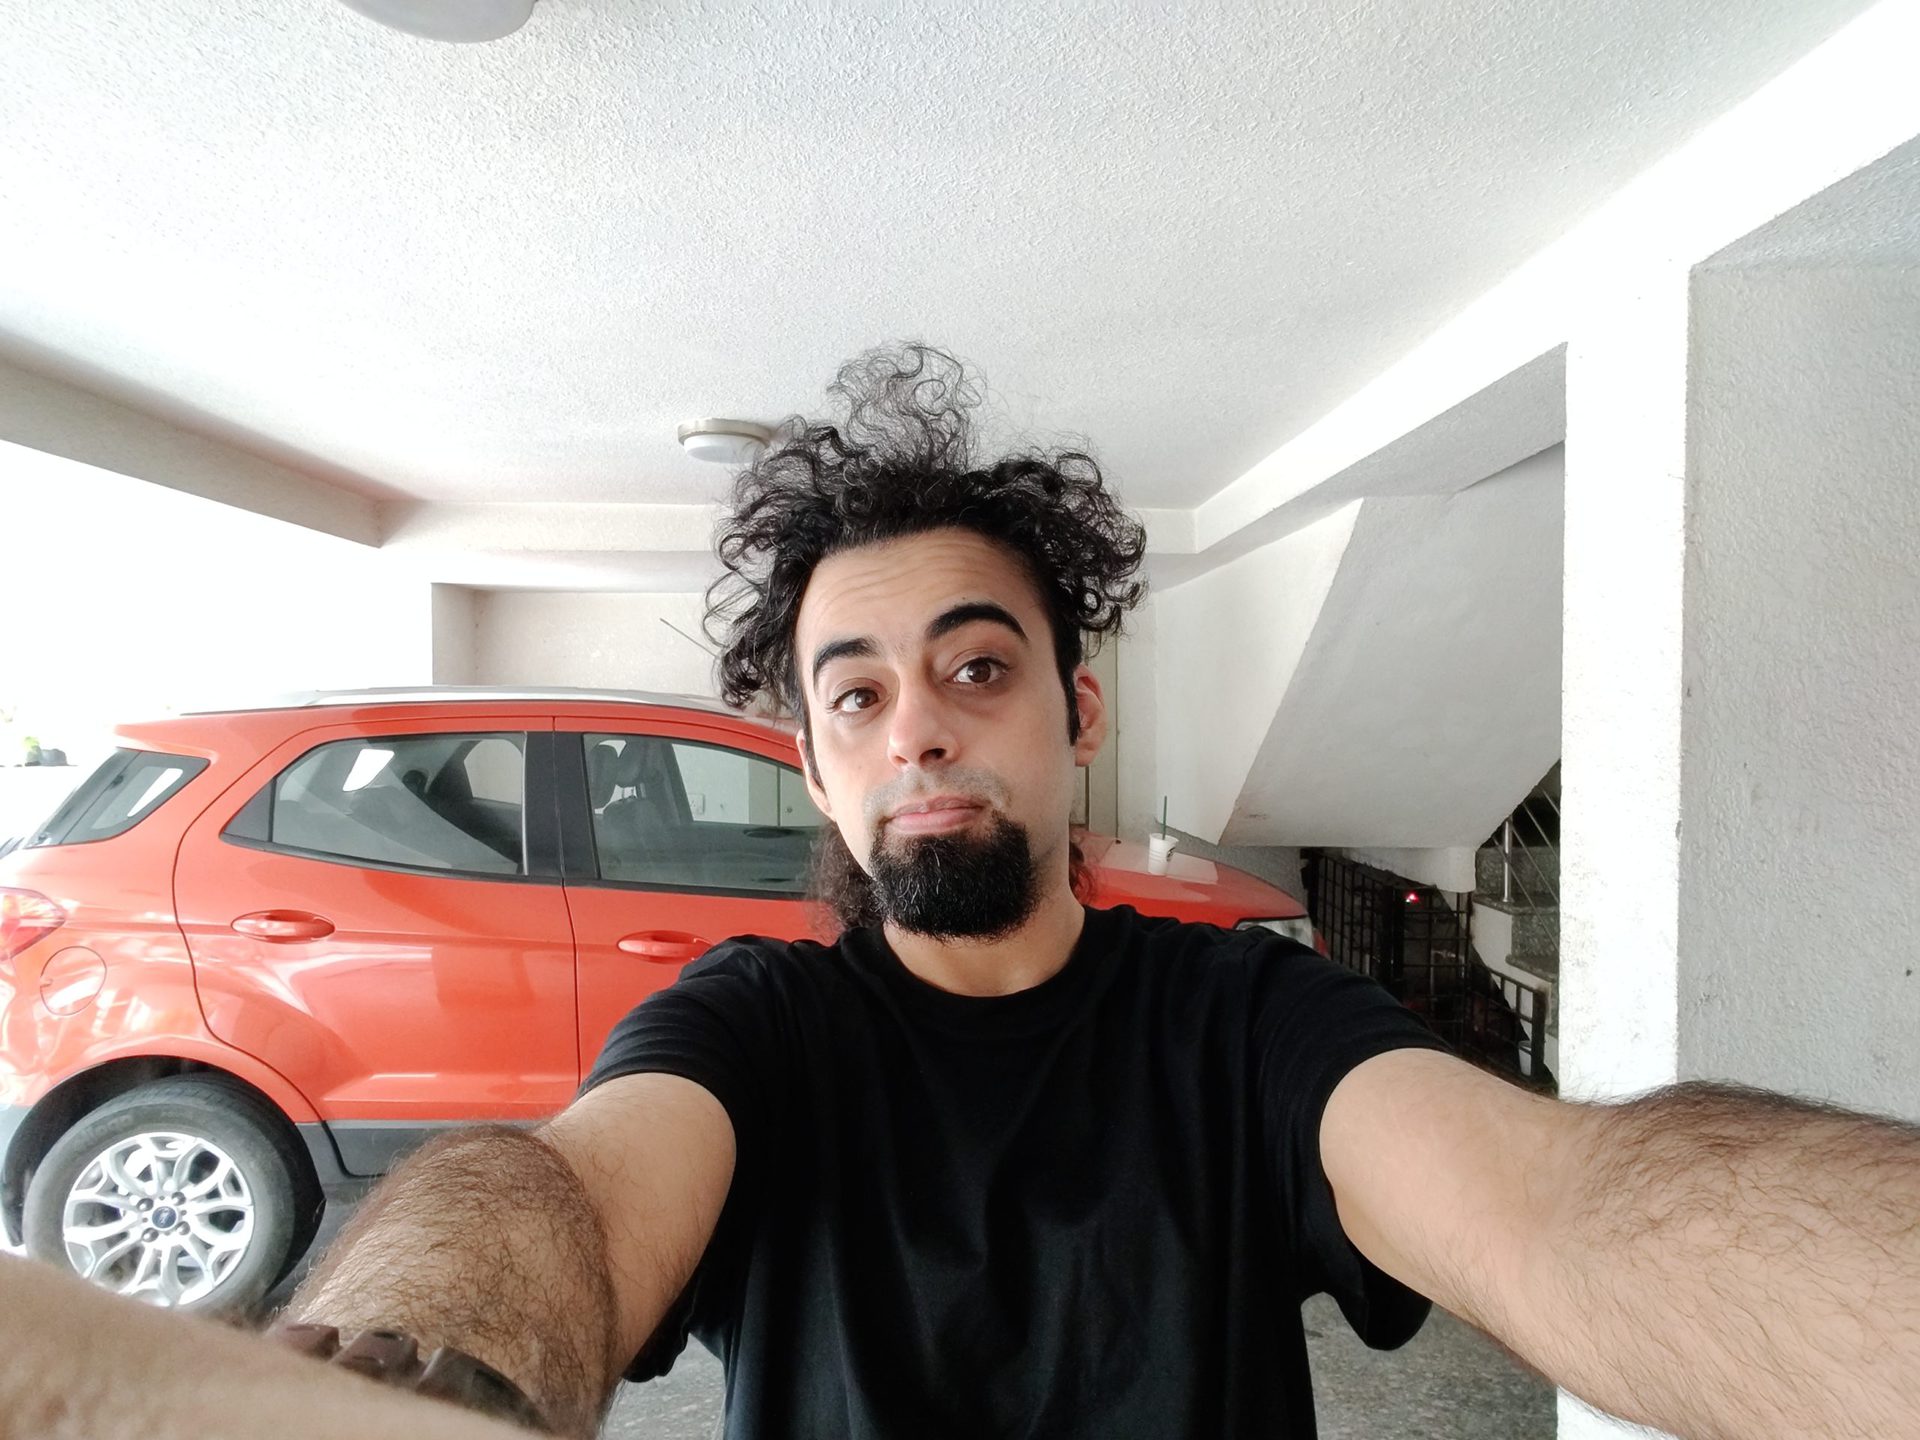 OnePlus Nord ultrawide selfie indoors of a man with black hair and a beard, wearing a black t-shirt and standing in front of a red vehicle.